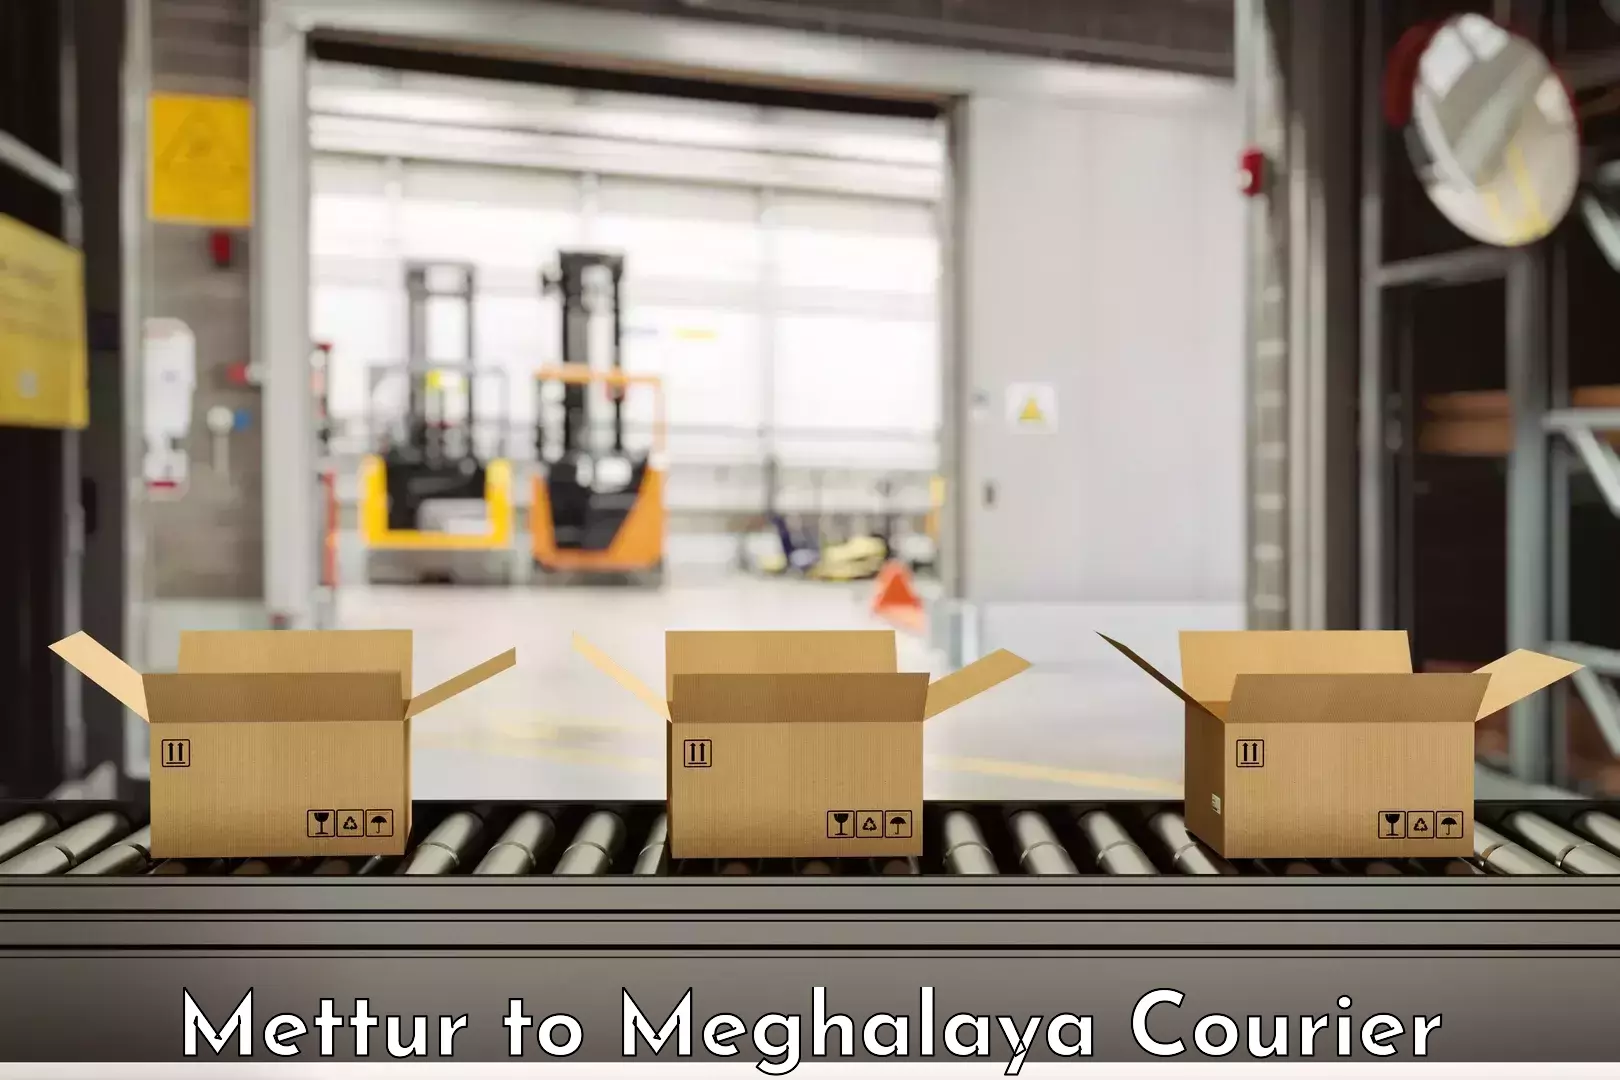 Moving and packing experts Mettur to Meghalaya